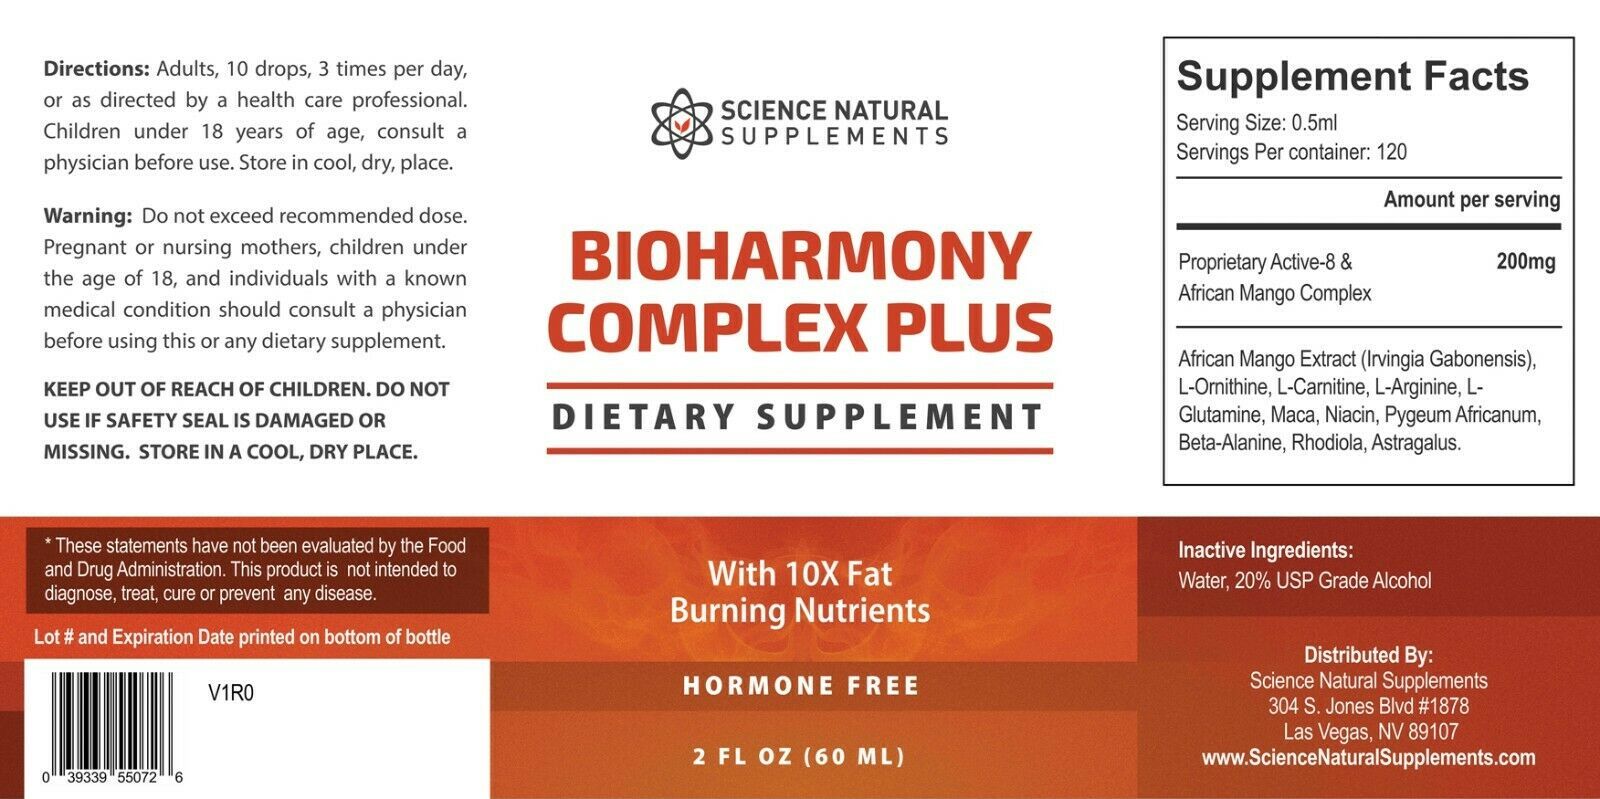 Primary image for Science Natural Supplements BioHarmony Complex Plus Fut Burning 120 Servings